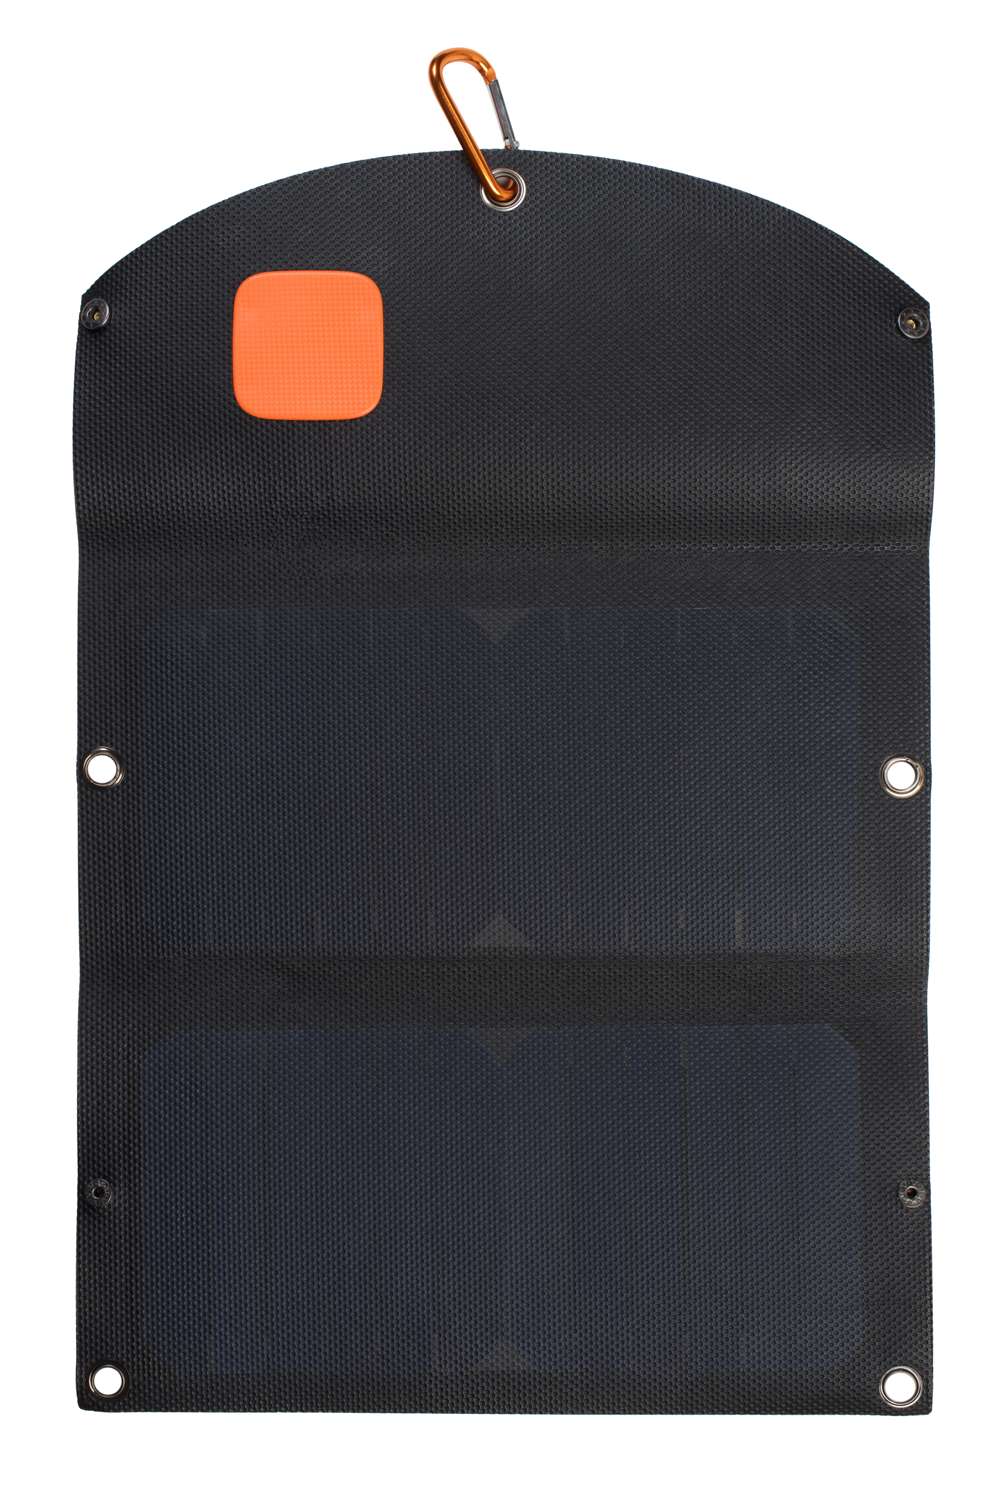 Xtorm AP250 - SolarBooster 14W Panel